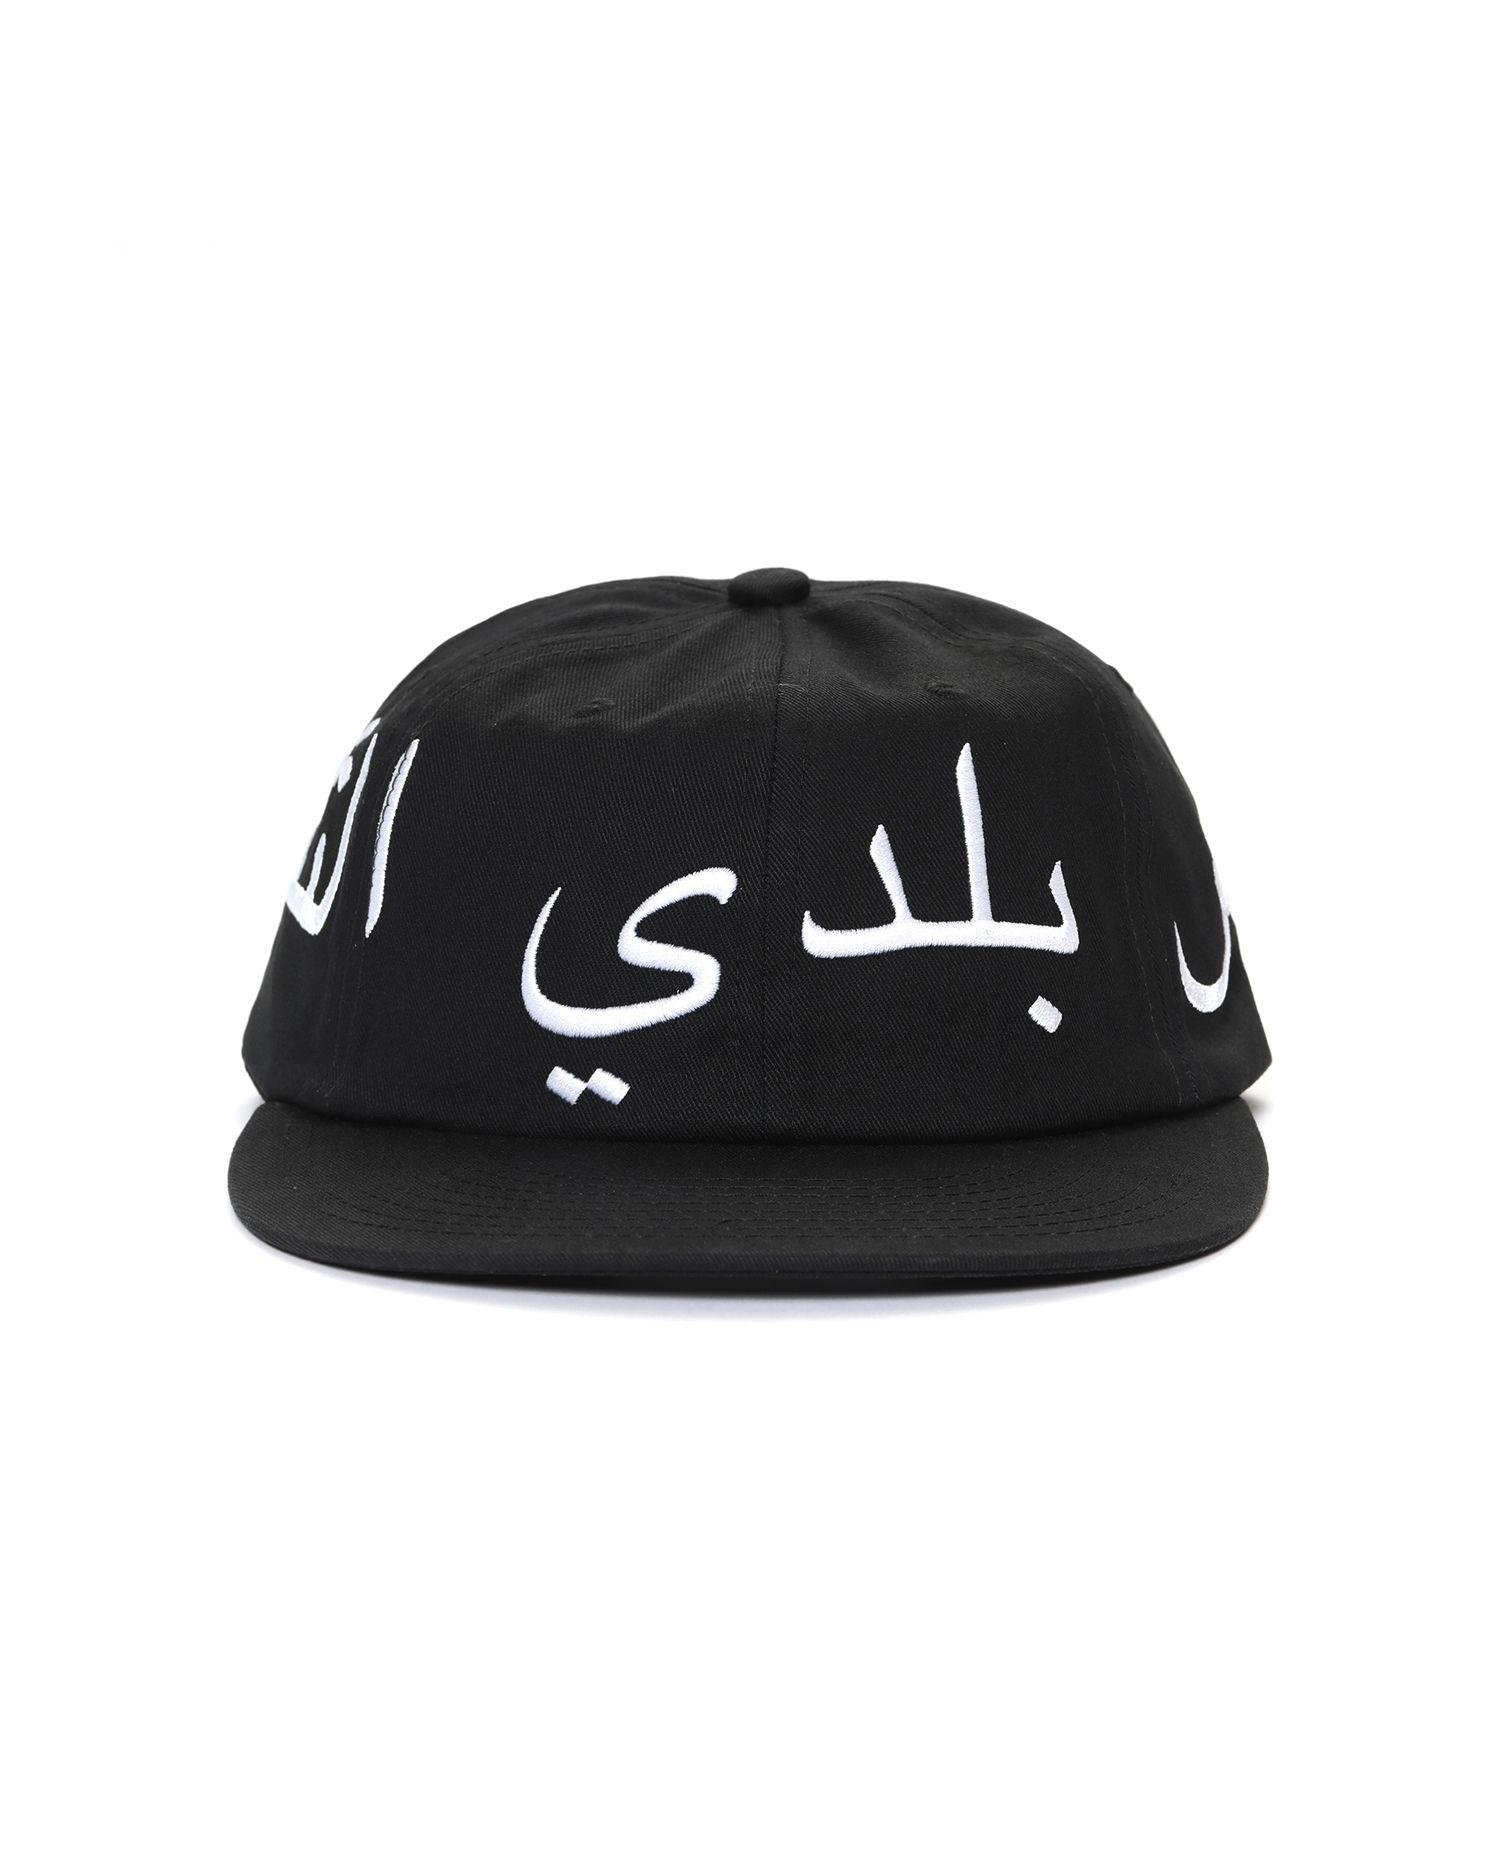 Arabic Unstructured cap by DIAMOND SUPPLY CO.